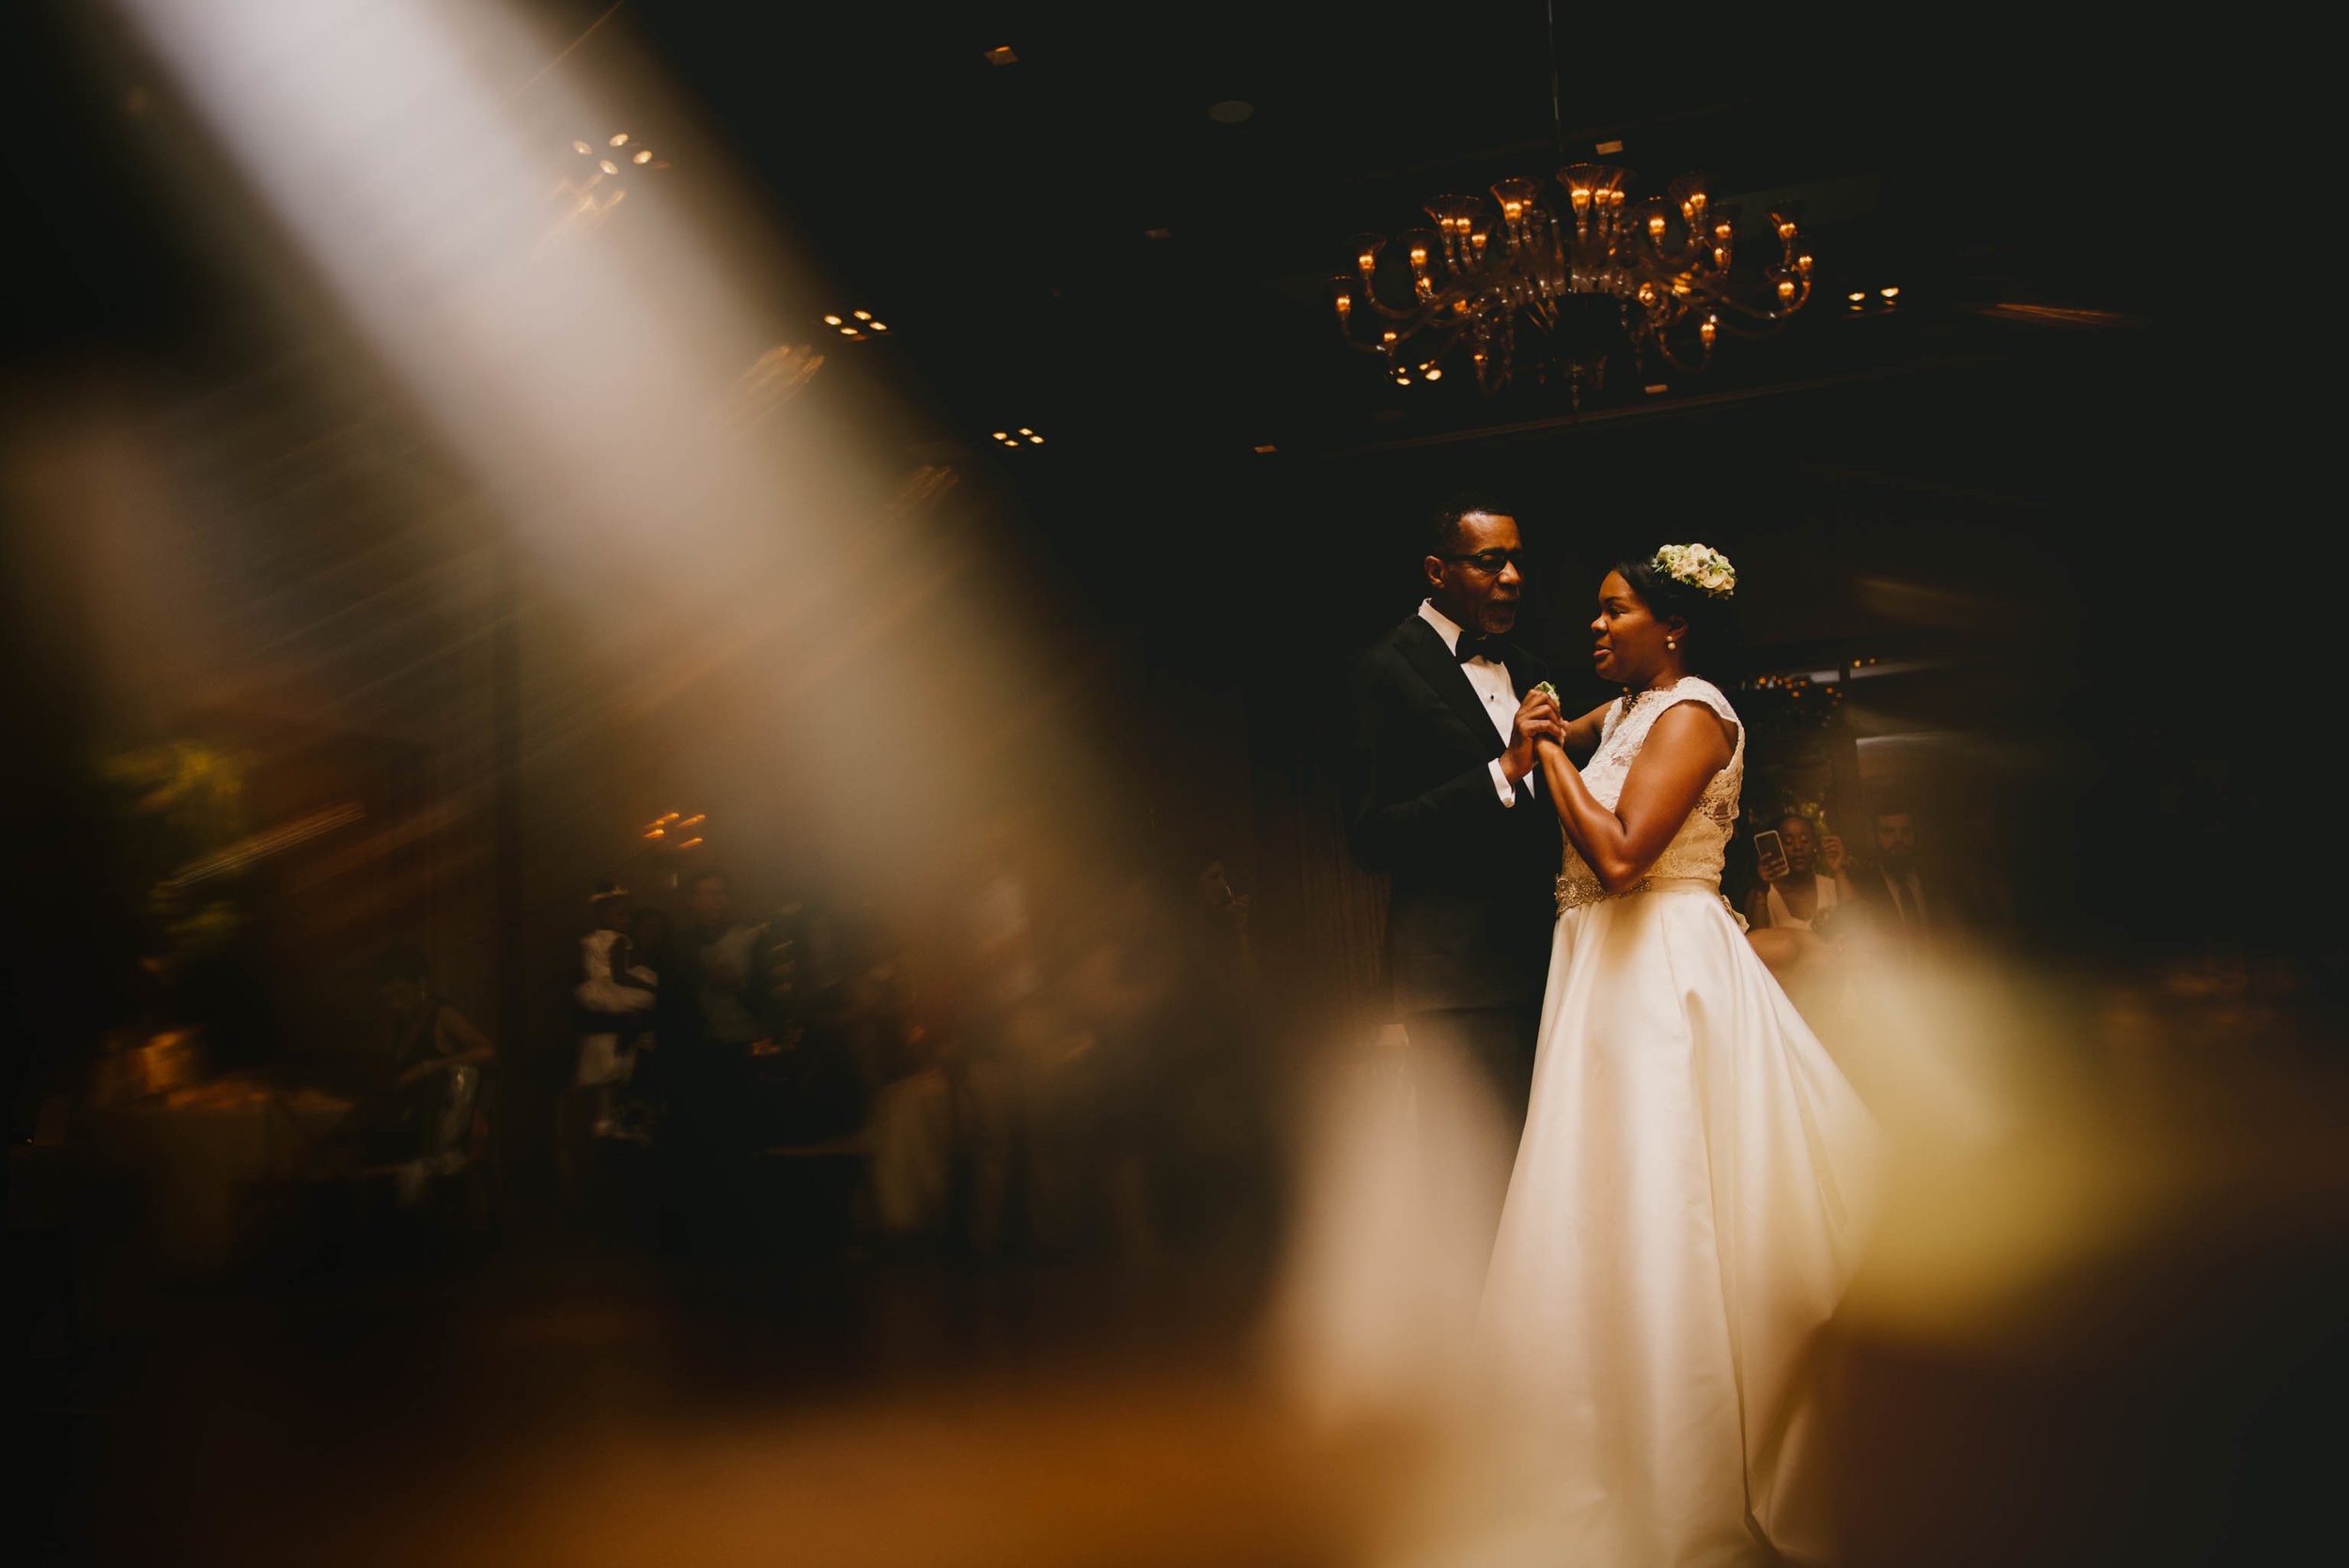 The bride and her father share a dance at this elegant wedding at the Umstead Hotel and Spa in Cary, NC